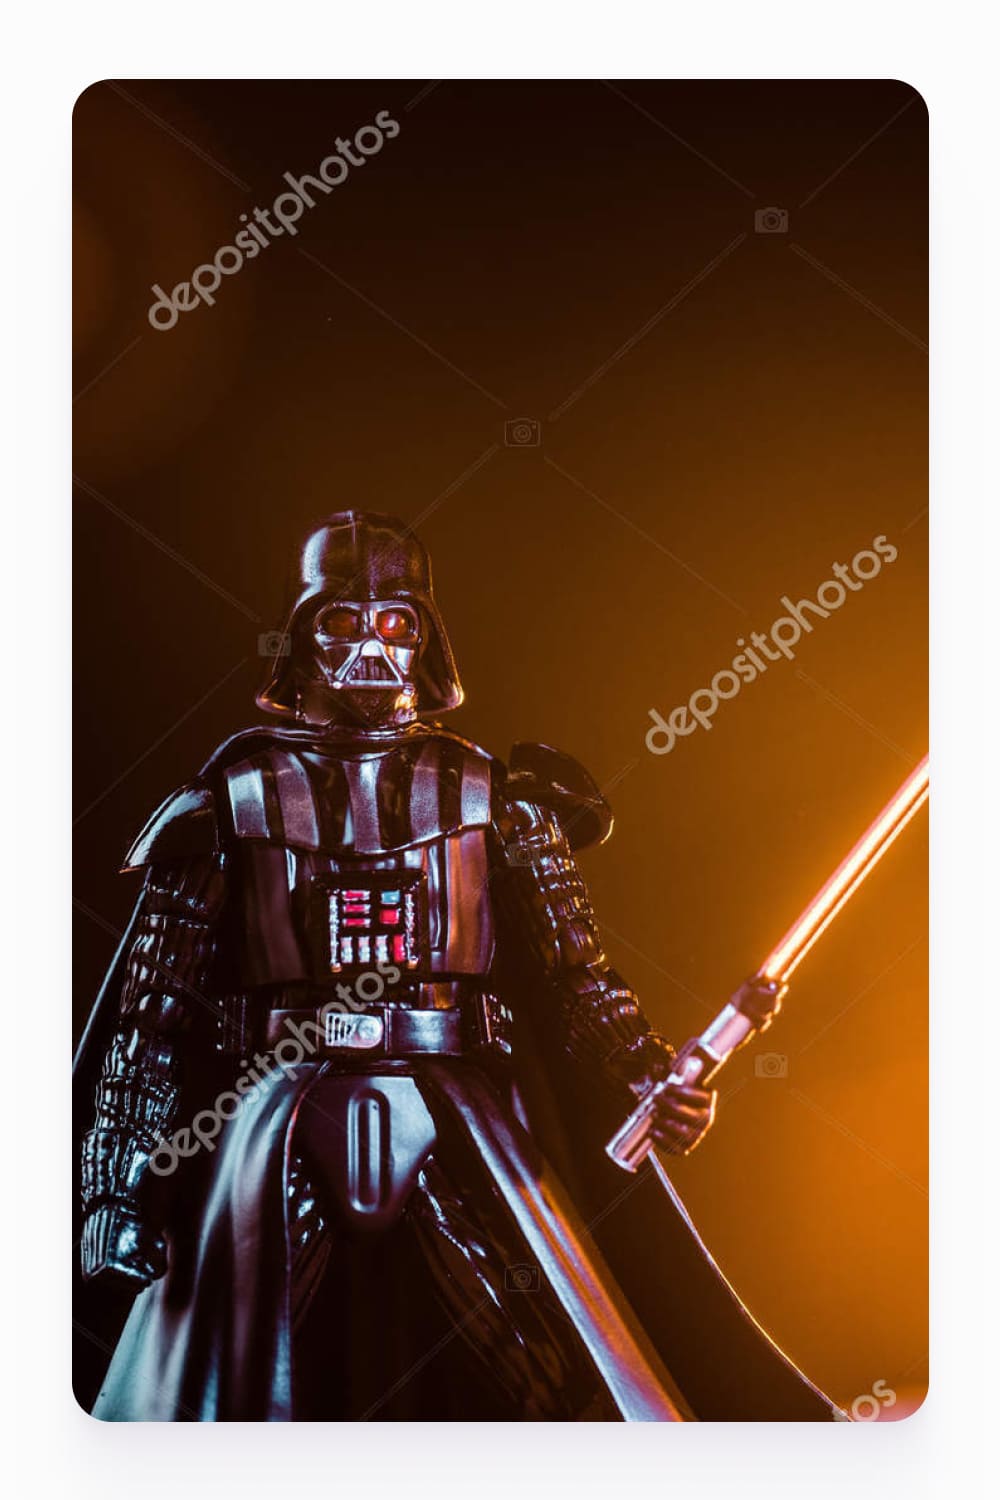 Darth Vader figurine with lightsaber on black background with shining sun.